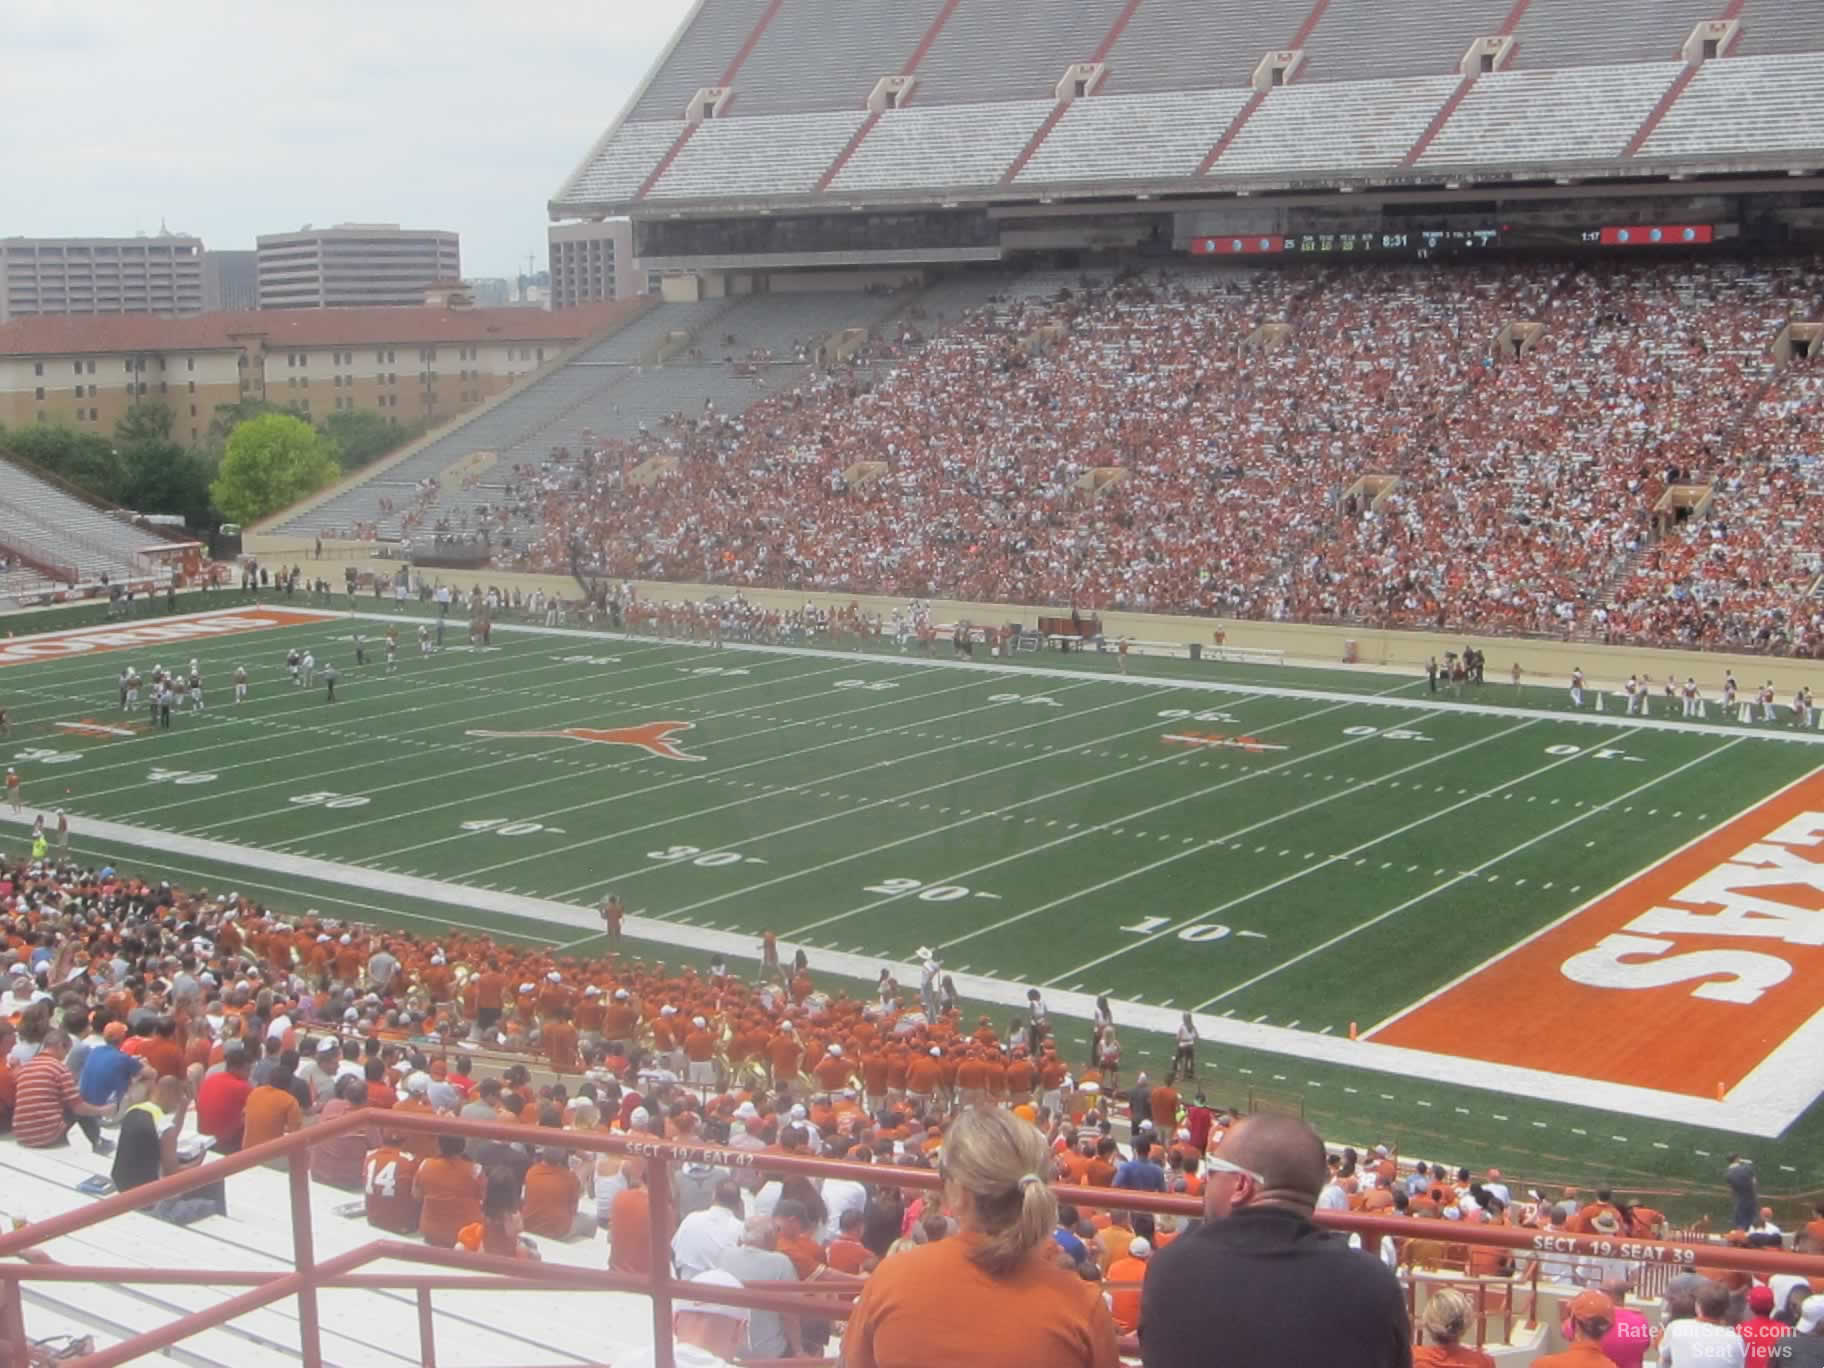 section 23, row 58 seat view  - dkr-texas memorial stadium